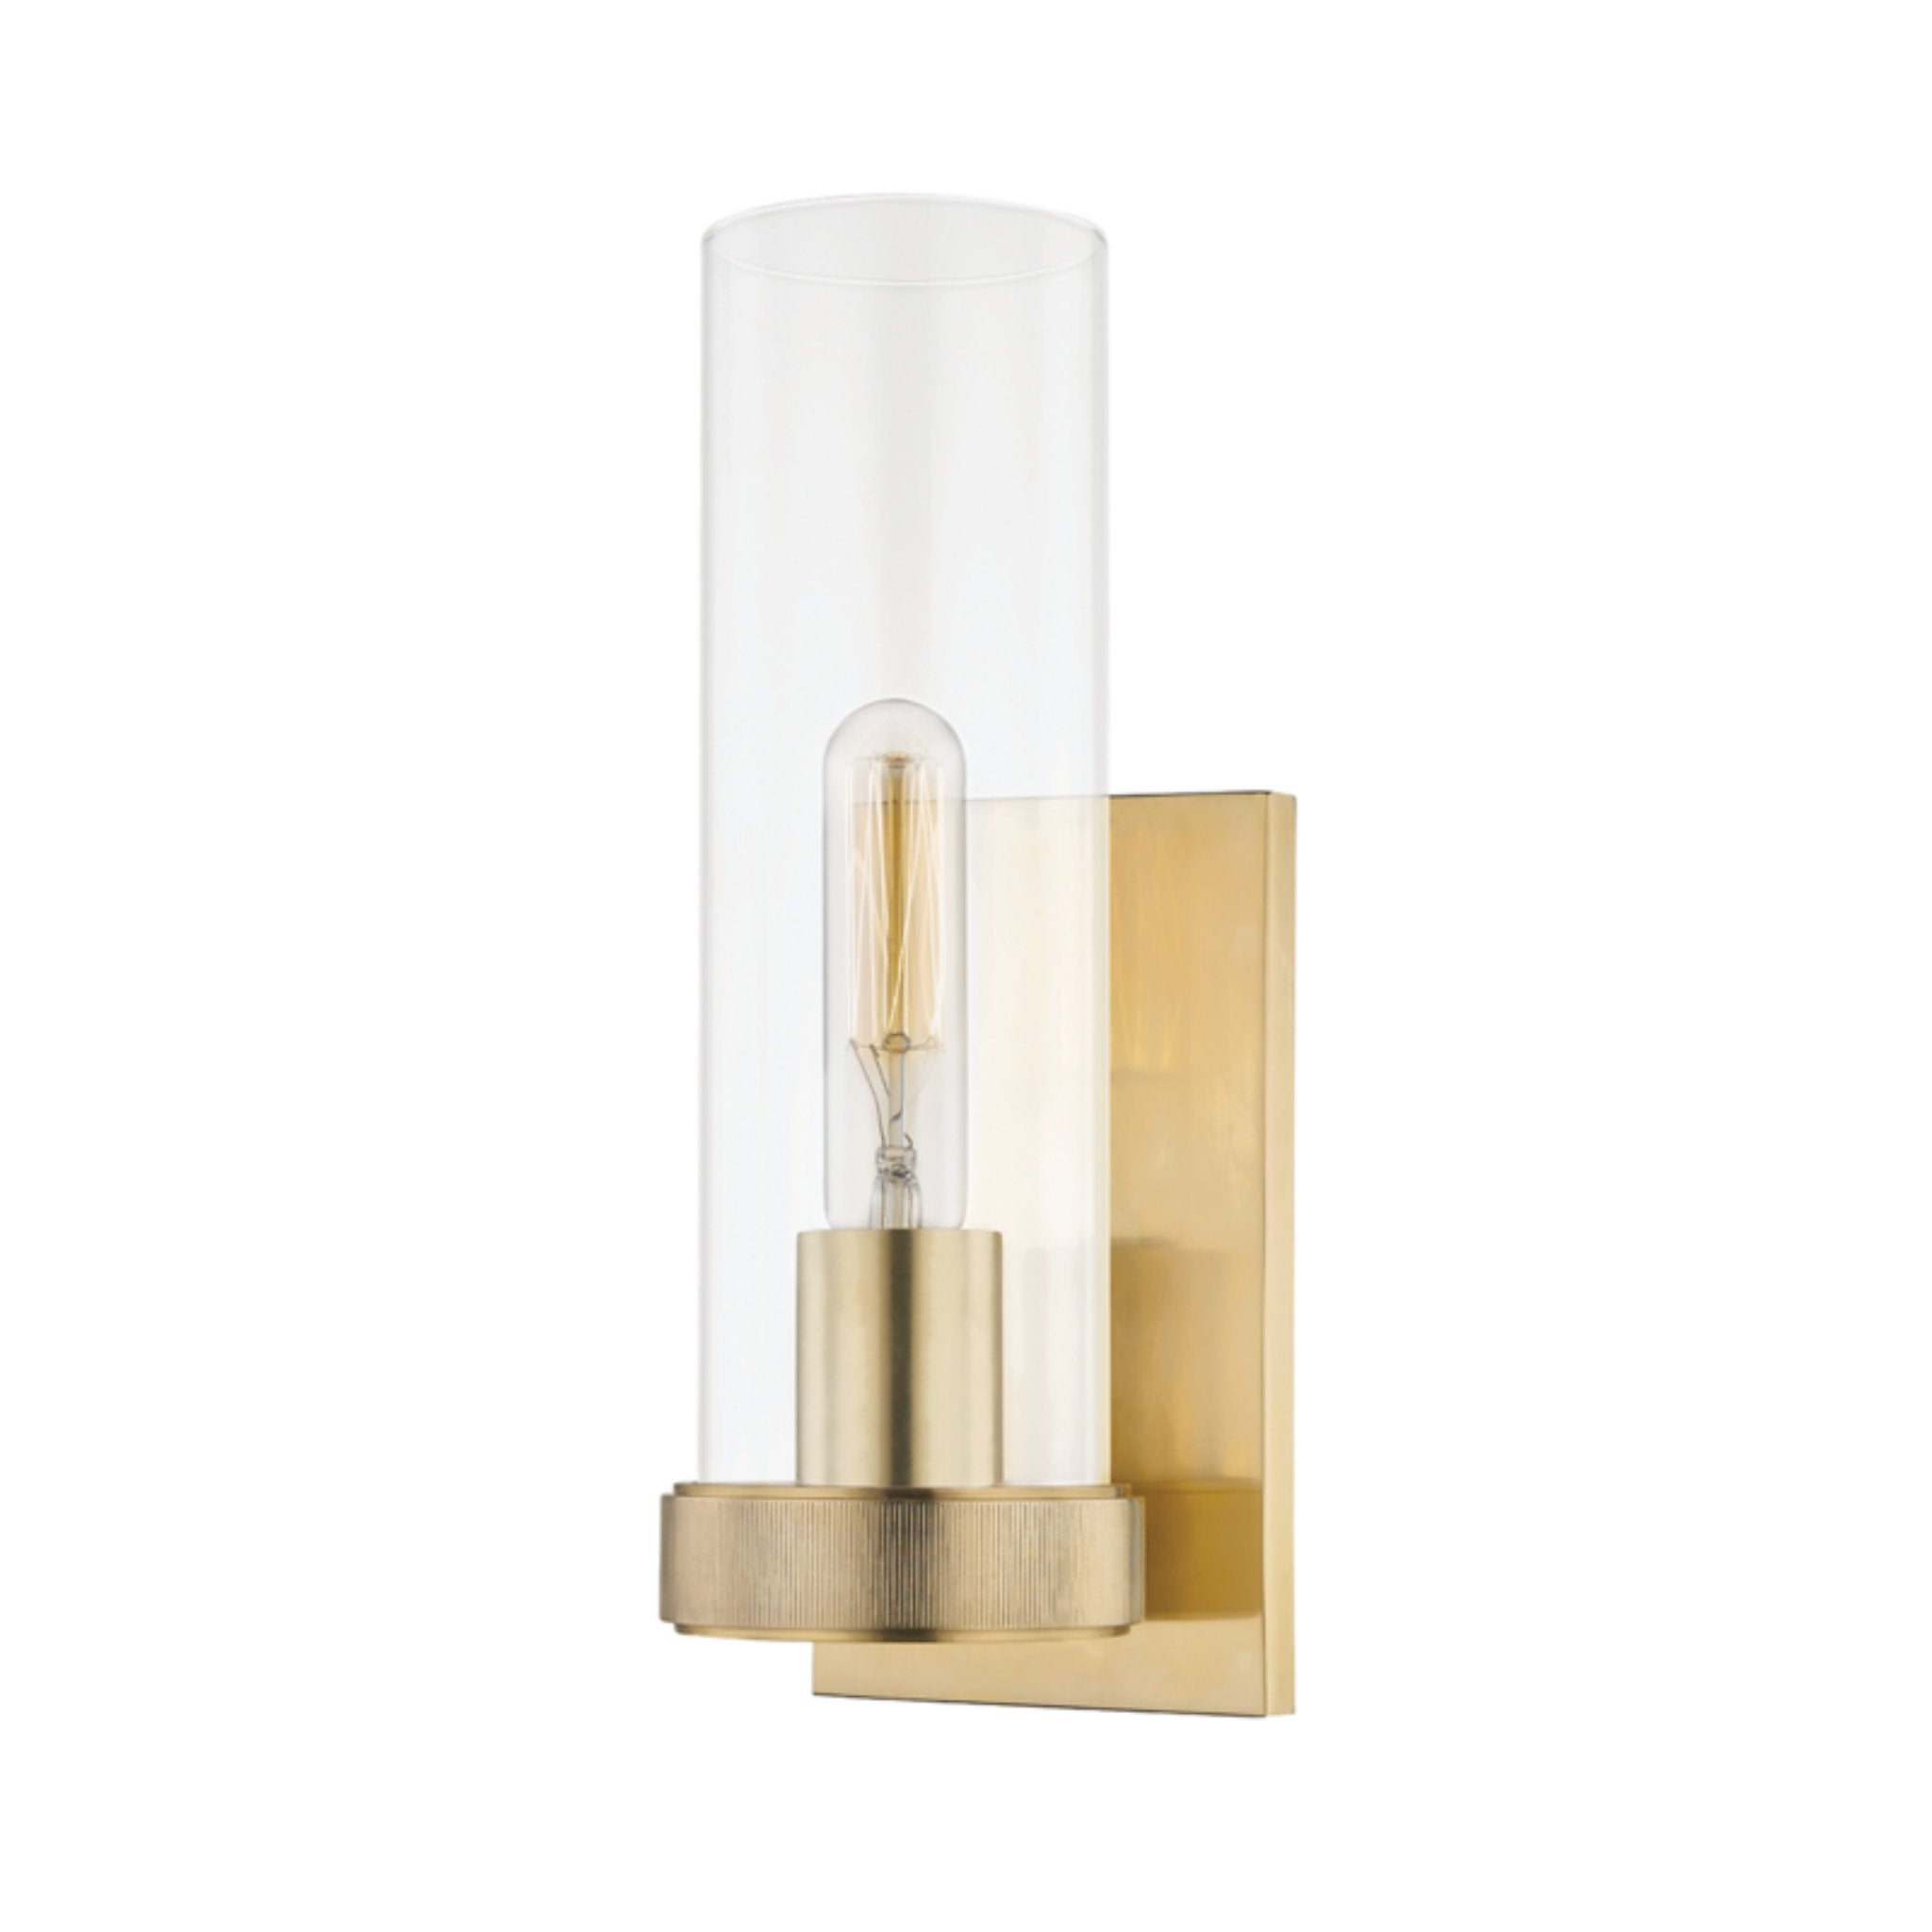 Briggs 1 Light Wall Sconce in Aged Brass